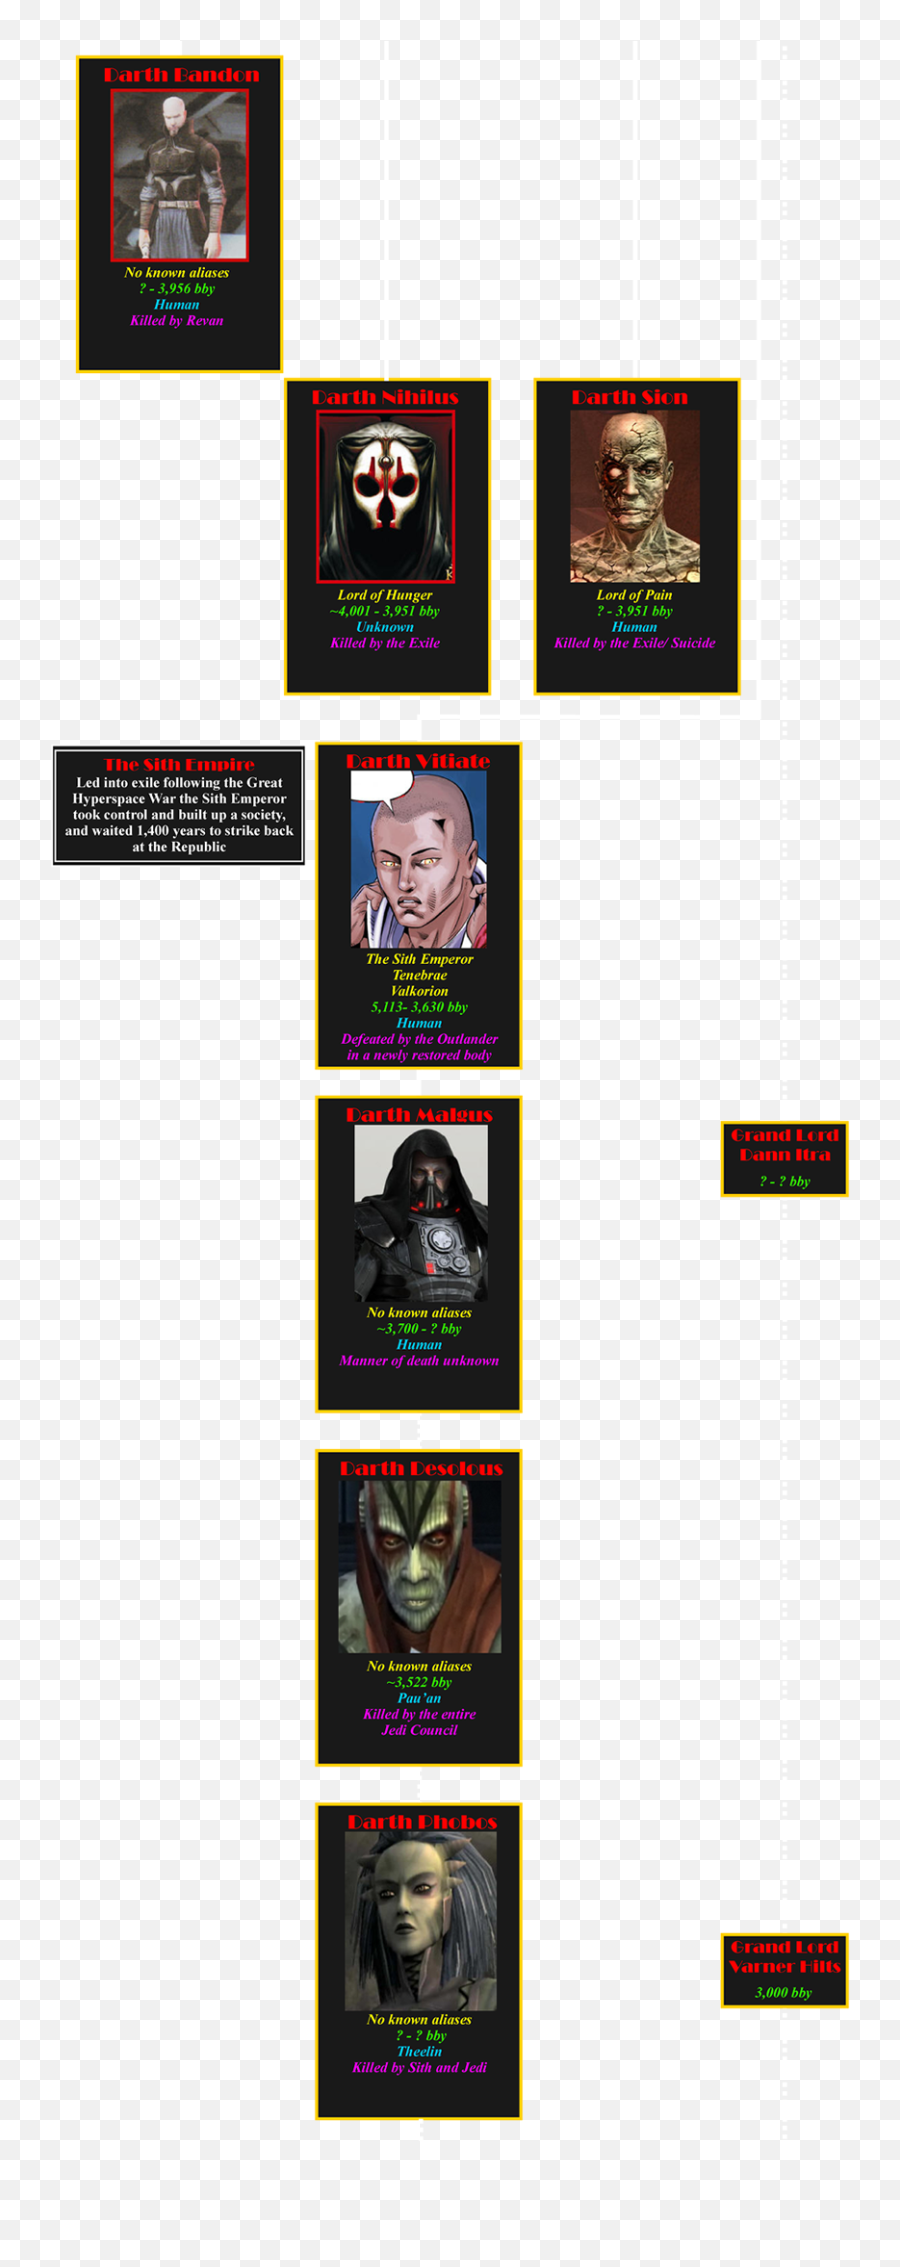 The Legends Sith Lord Chronology - Fictional Character Emoji,Darth Plagues The Wise Emoji Story